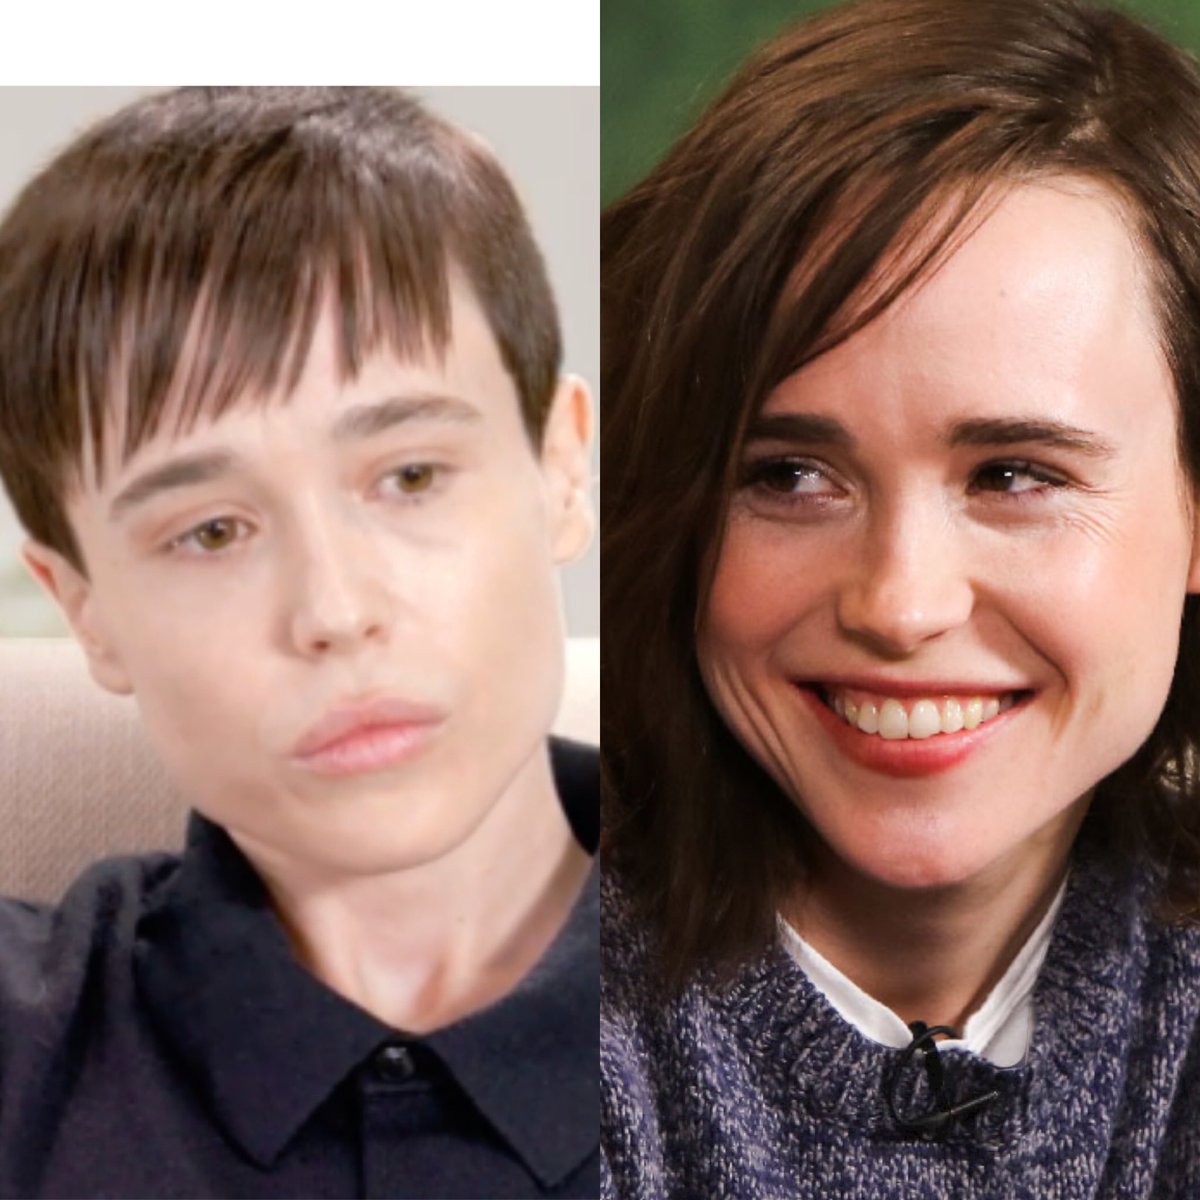 @Sheri_D67 @ChillTime2077 Really? 😵‍💫 SHE has gone from looking like a cute lesbian woman to a heroin addicted 14 yr old boy. 😬😵‍💫 #transmenarewomen #mentalillness #elliotpage #stillagirl